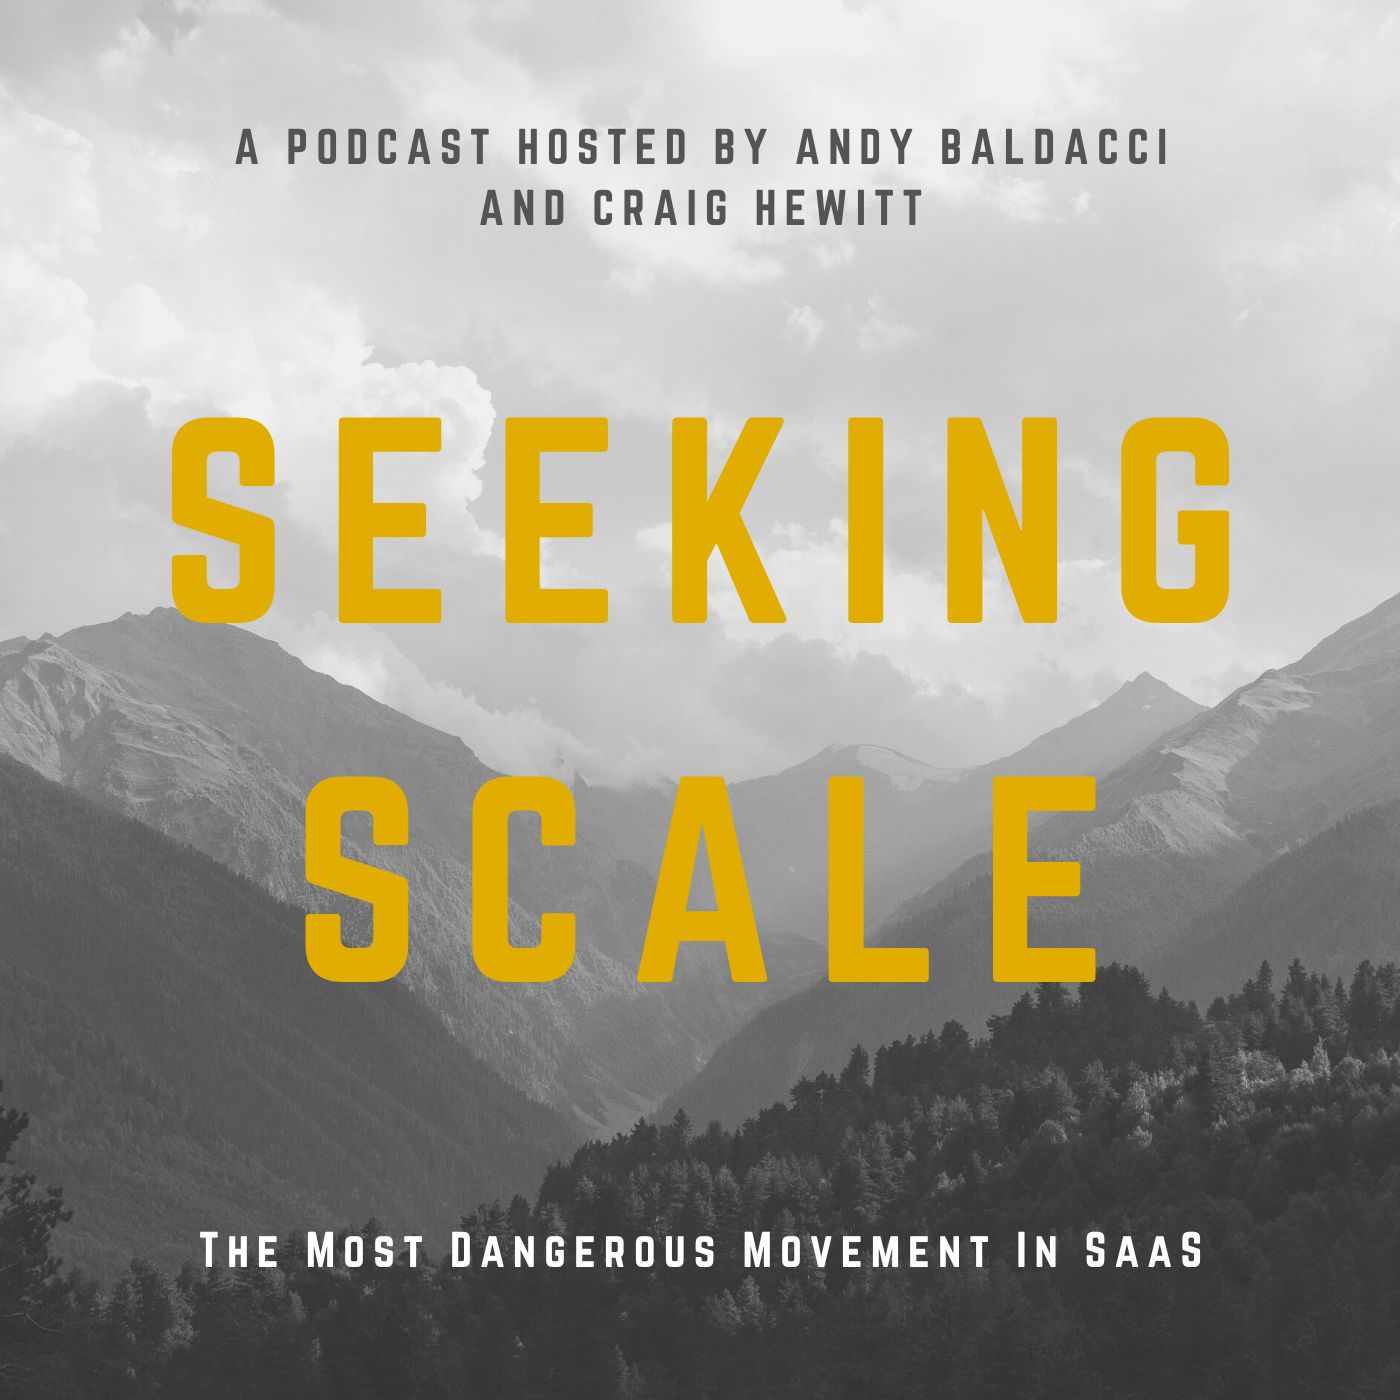 The Most Dangerous Movement In SaaS